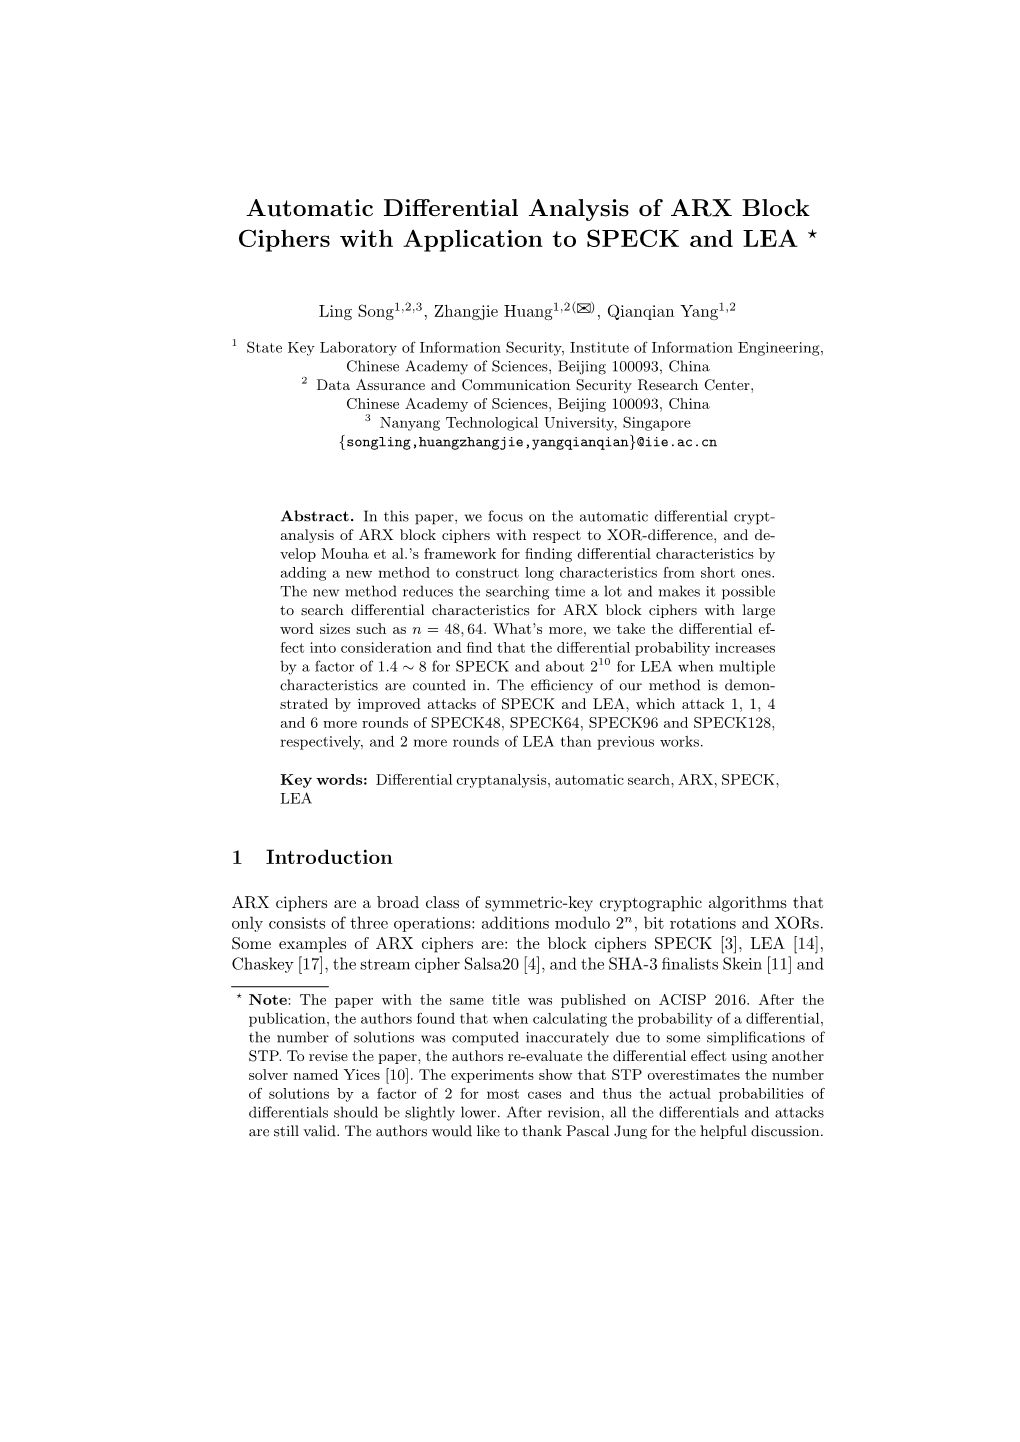 Automatic Differential Analysis of ARX Block Ciphers with Application to SPECK And